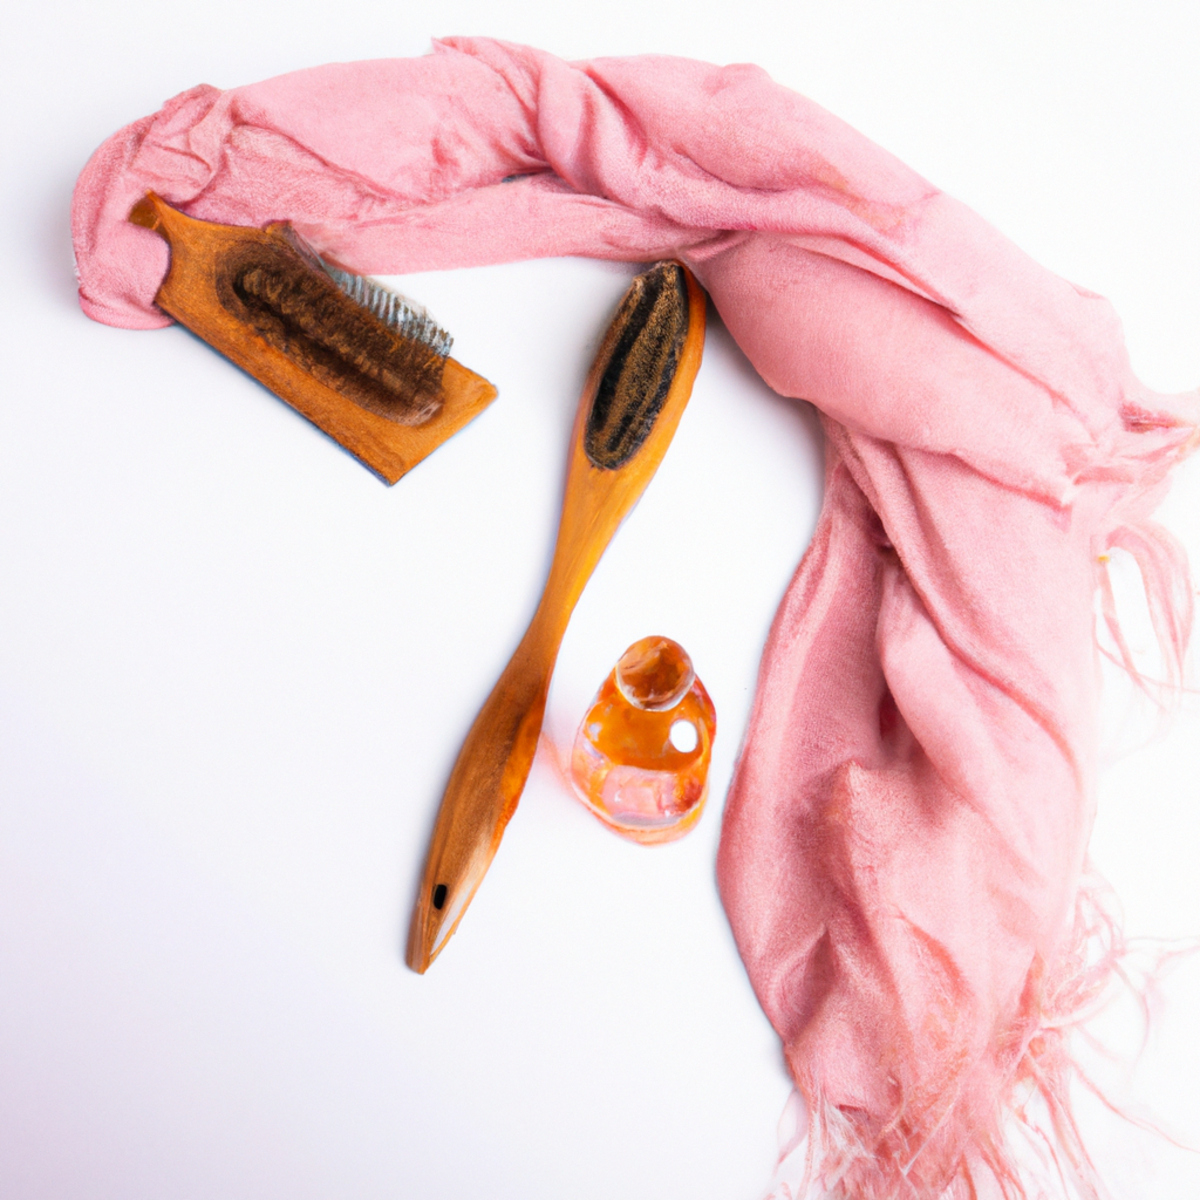 Hair care essentials: natural bristle brush, argan oil, and silk scarf for frizz-free locks.